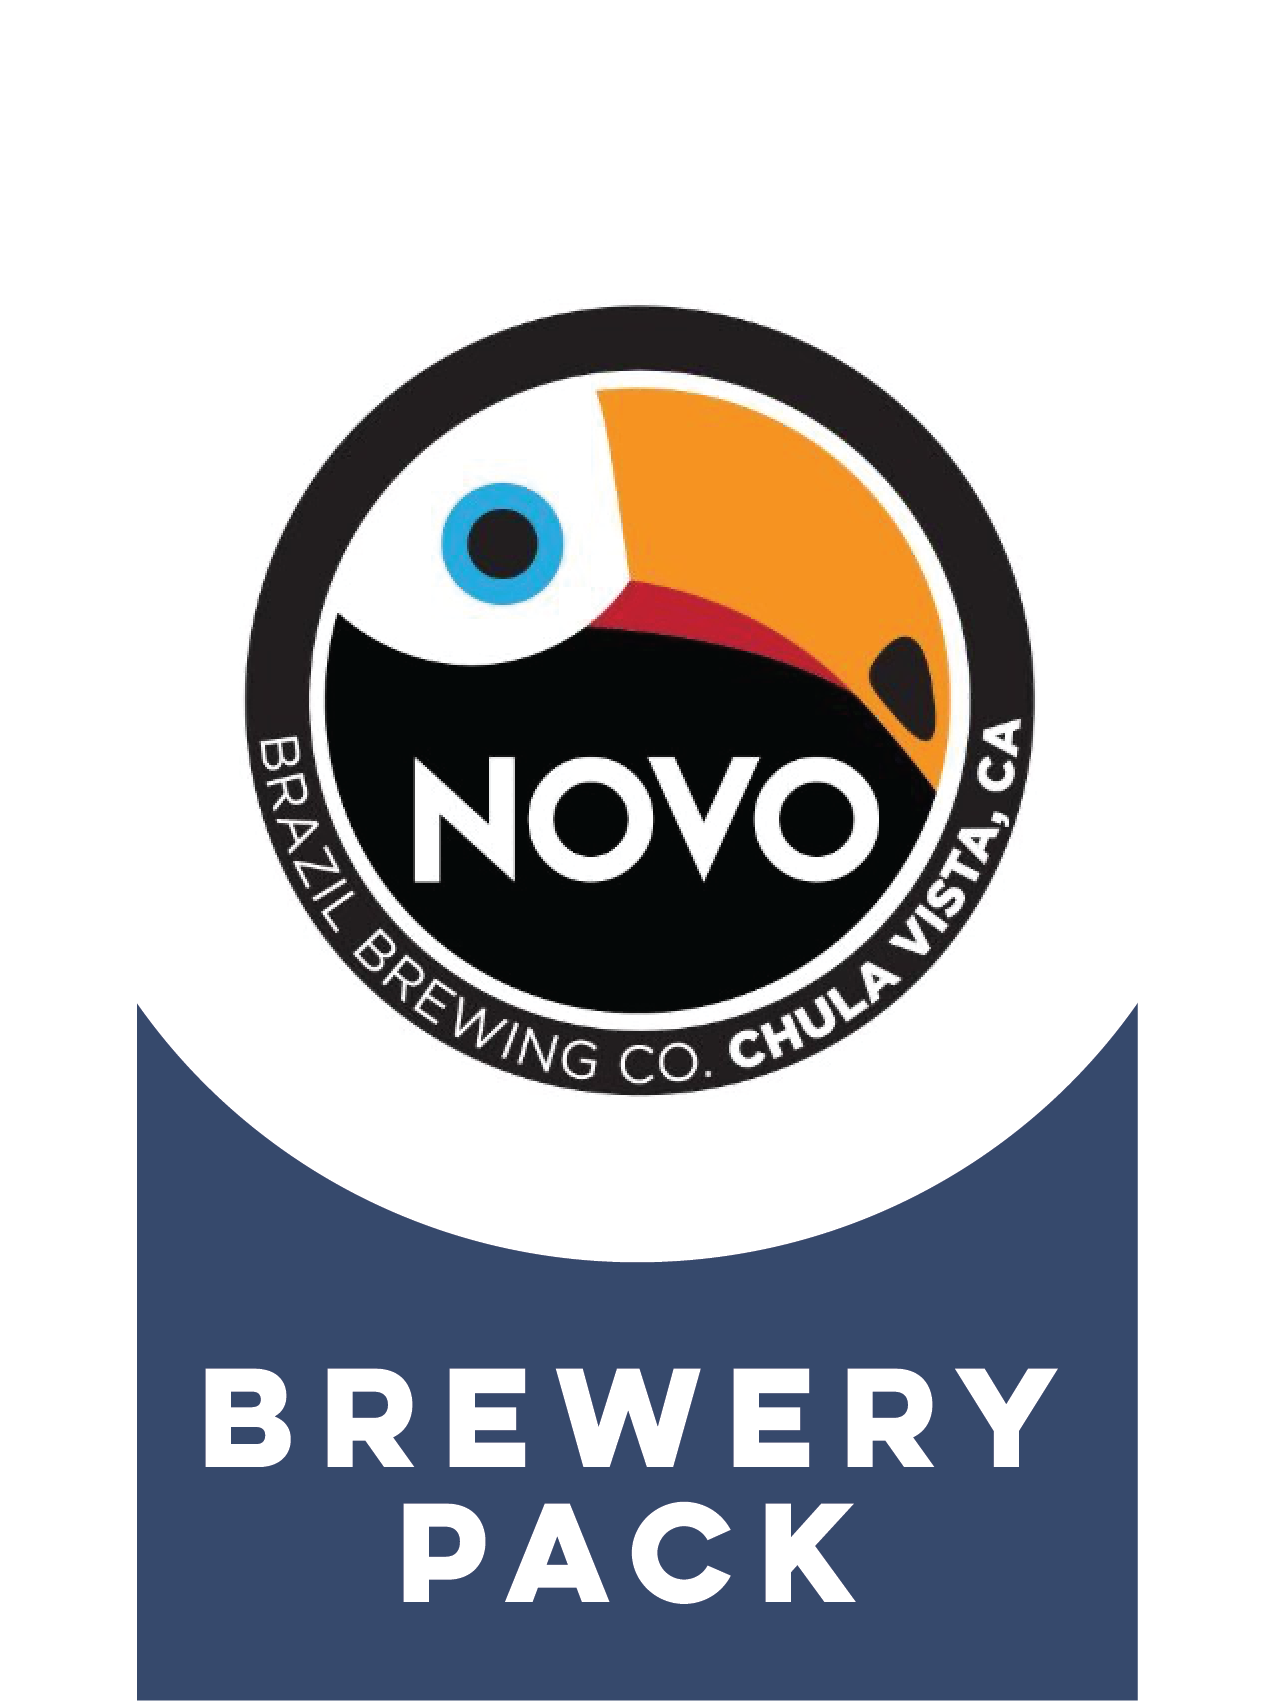 -Novo Brazil- Novo Brazil Brewery Pack-Packs & Cases- Only @ Beer Republic - The best online beer store for American & Canadian craft beer - Buy beer online from the USA and Canada - Bier online kopen - Amerikaans bier kopen - Craft beer store - Craft beer kopen - Amerikanisch bier kaufen - Bier online kaufen - Acheter biere online - IPA - Stout - Porter - New England IPA - Hazy IPA - Imperial Stout - Barrel Aged - Barrel Aged Imperial Stout - Brown - Dark beer - Blond - Blonde - Pilsner - Lager - Wheat - W